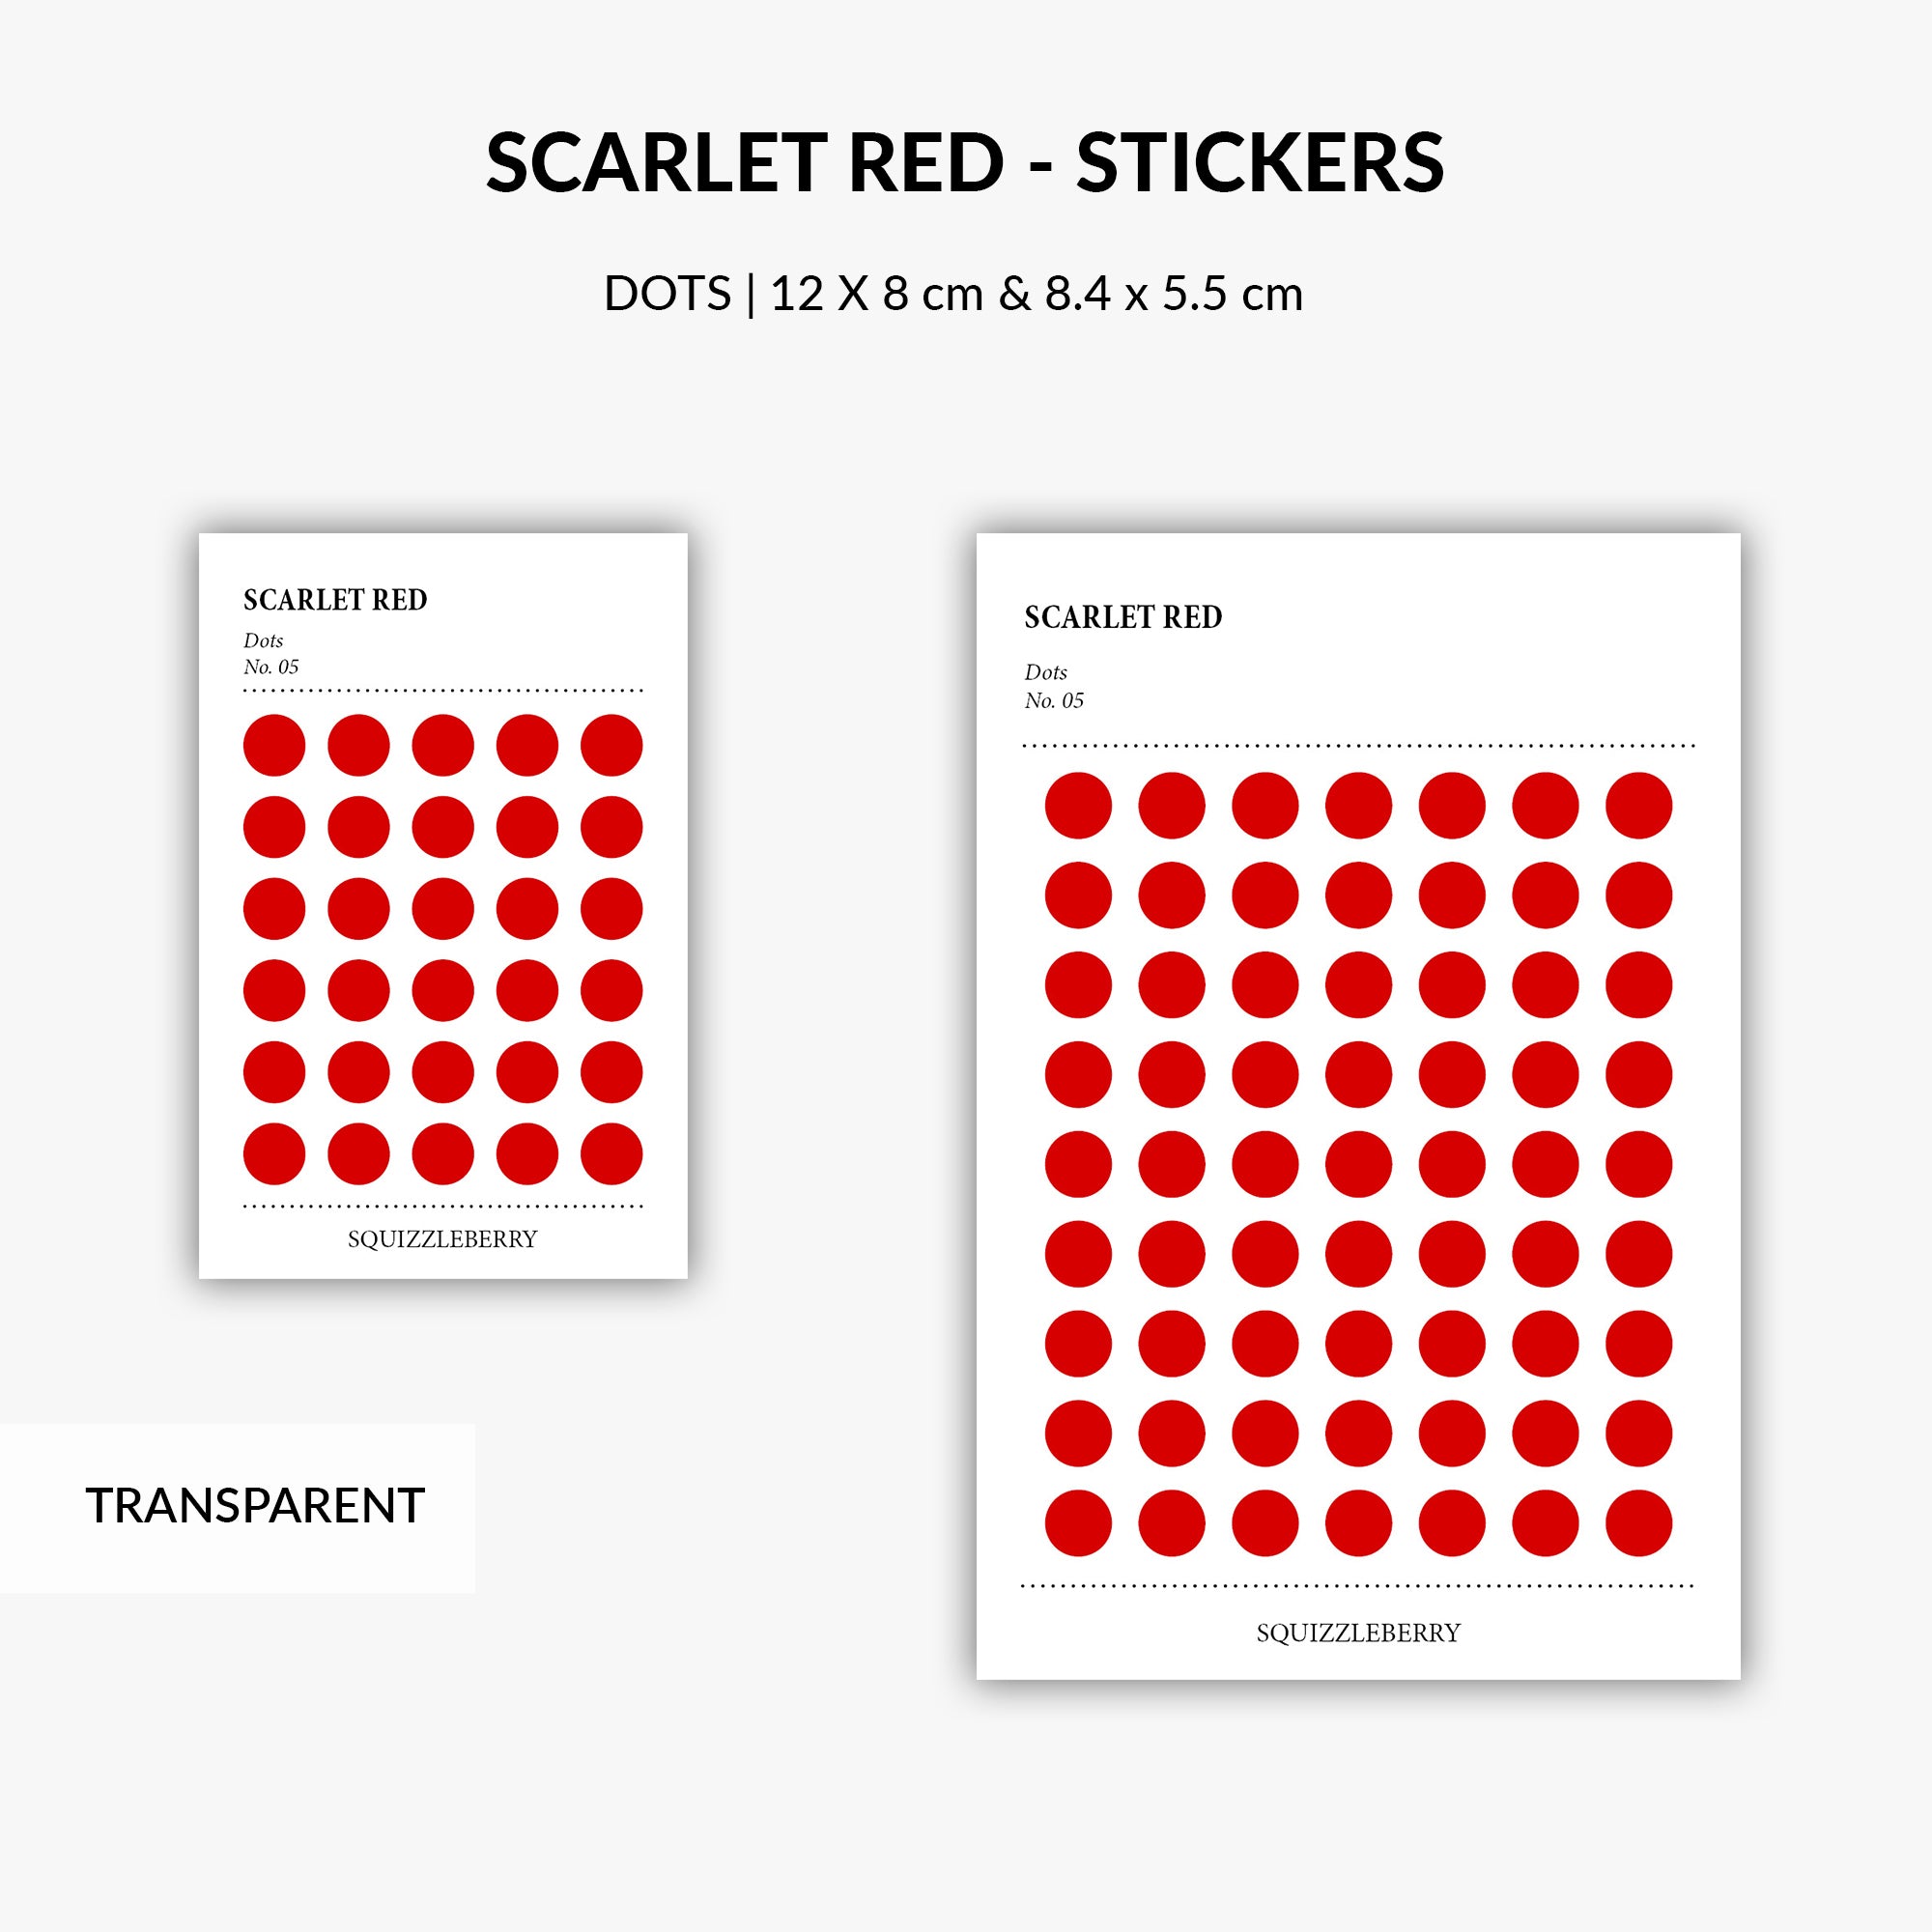 Scarlet Red - Dots - Stickers – SquizzleBerry